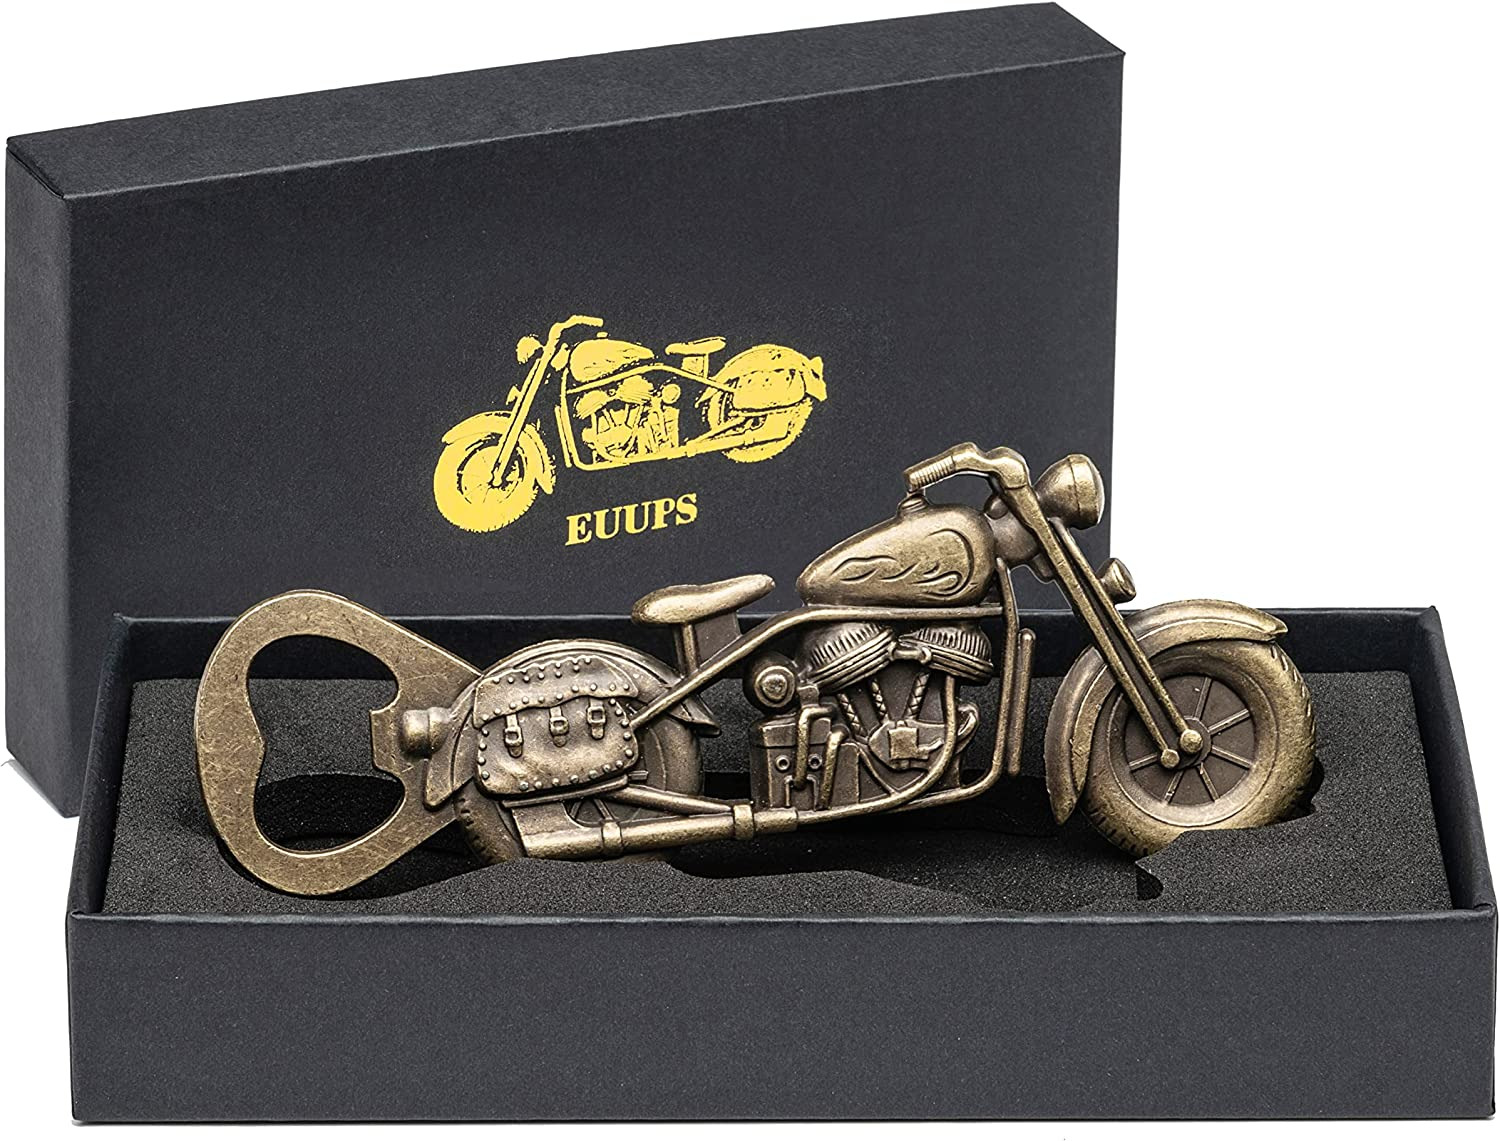 Unique Motorcycle Beer Gifts for Men Vintage Motorcycle Bottle Opener, Fathers D